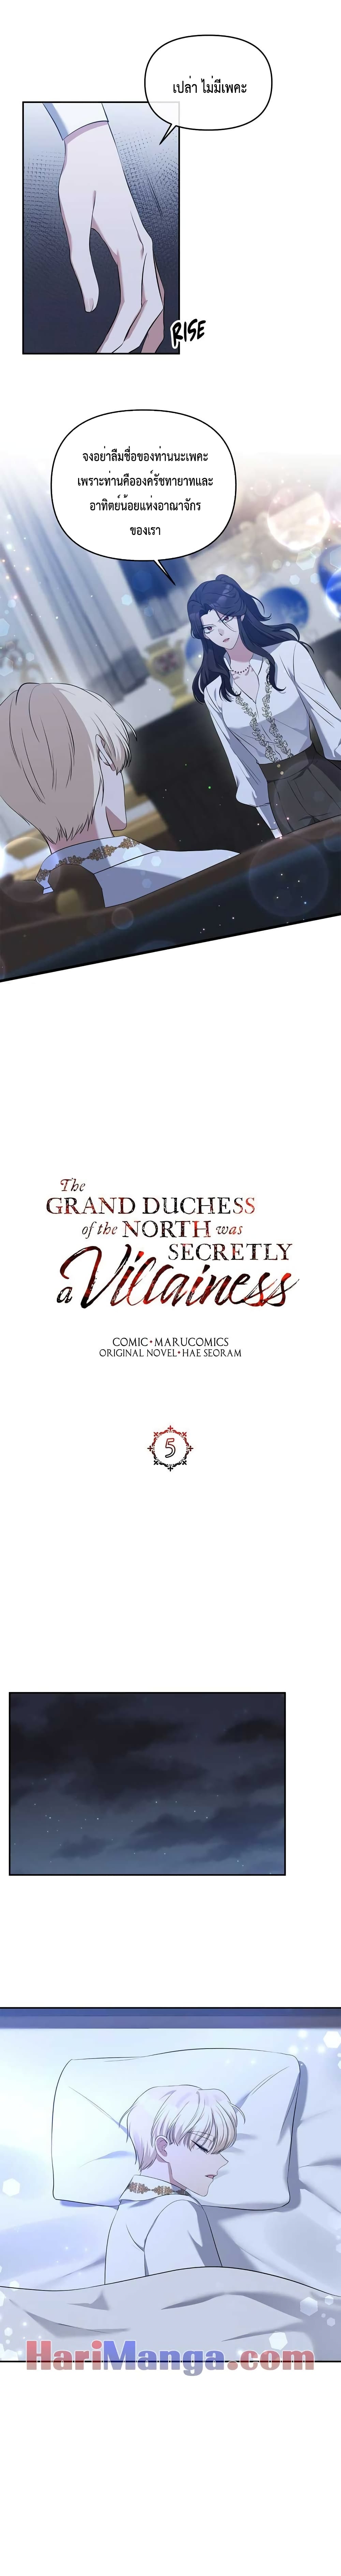 The Grand Duchess of the North Was Secretly a Villainess 5-5